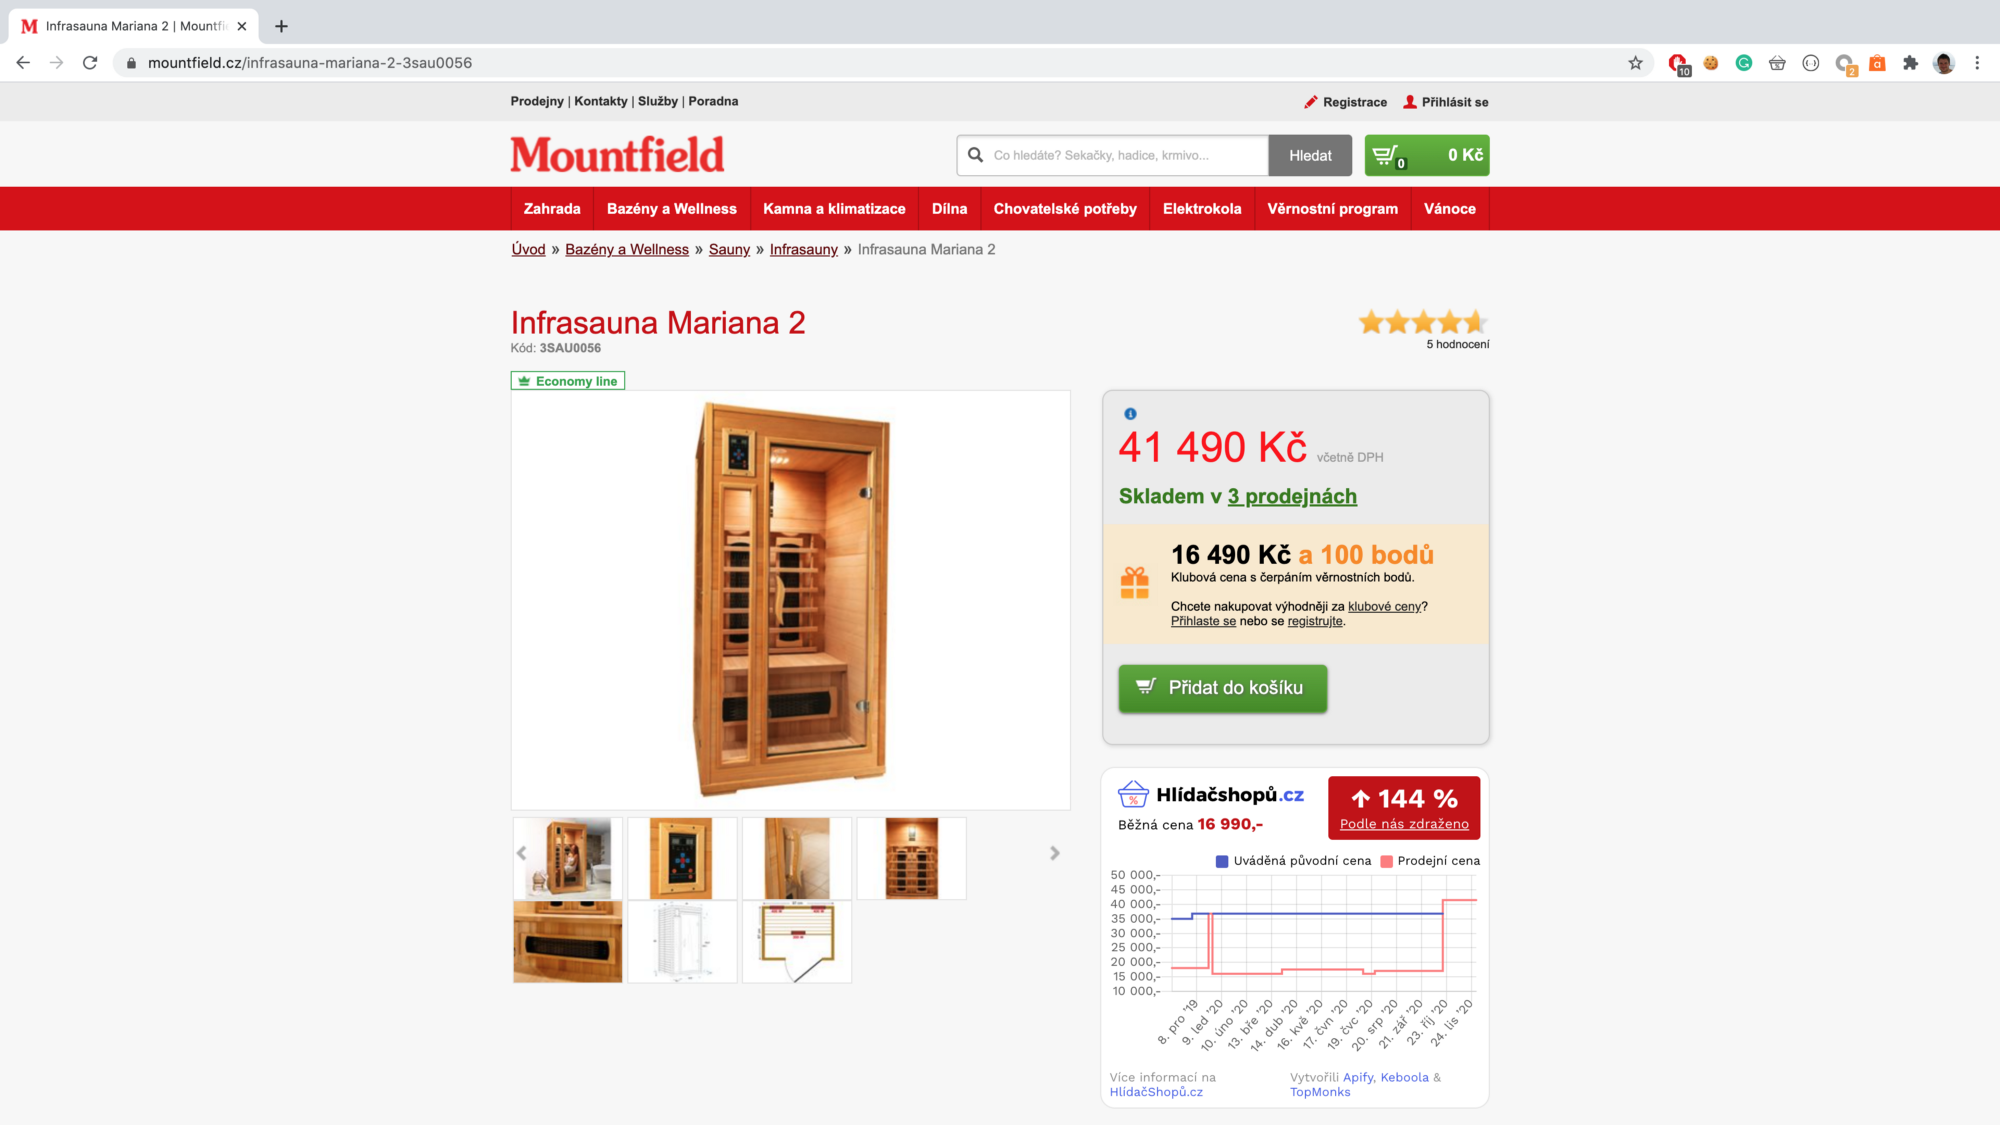 screenshot of an infrared sauna on mountfield.cz website for the price of CZK 41,490